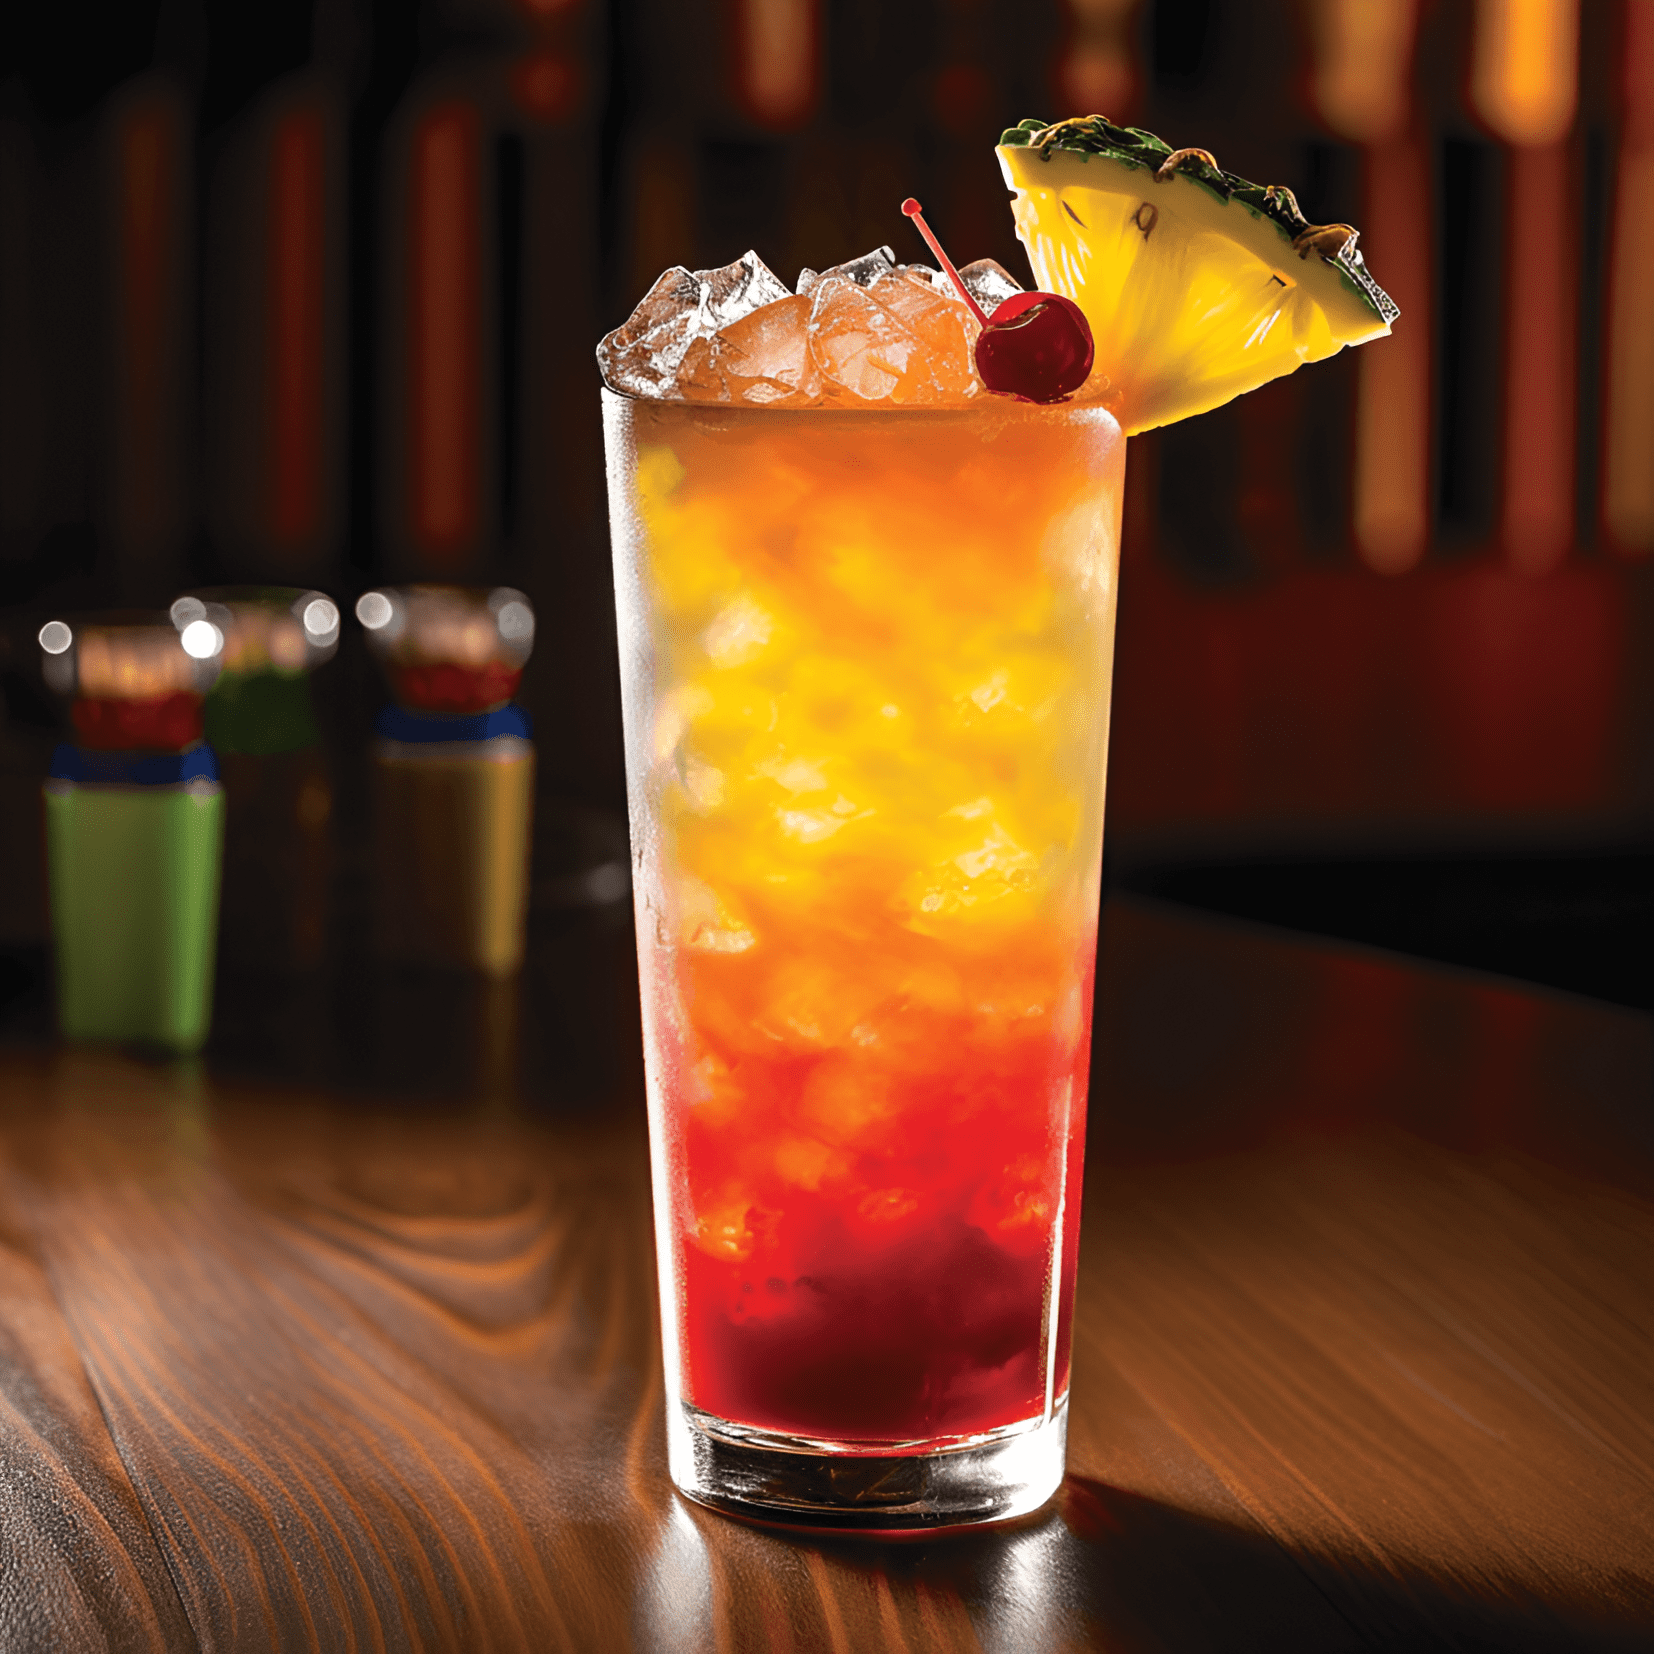 Caribbean Breeze Cocktail Recipe - The Caribbean Breeze cocktail offers a delightful mix of sweet, tangy, and fruity flavors. The combination of pineapple and orange juice creates a refreshing citrus base, while the coconut rum adds a hint of tropical sweetness. The grenadine provides a touch of tartness, balancing out the overall taste.